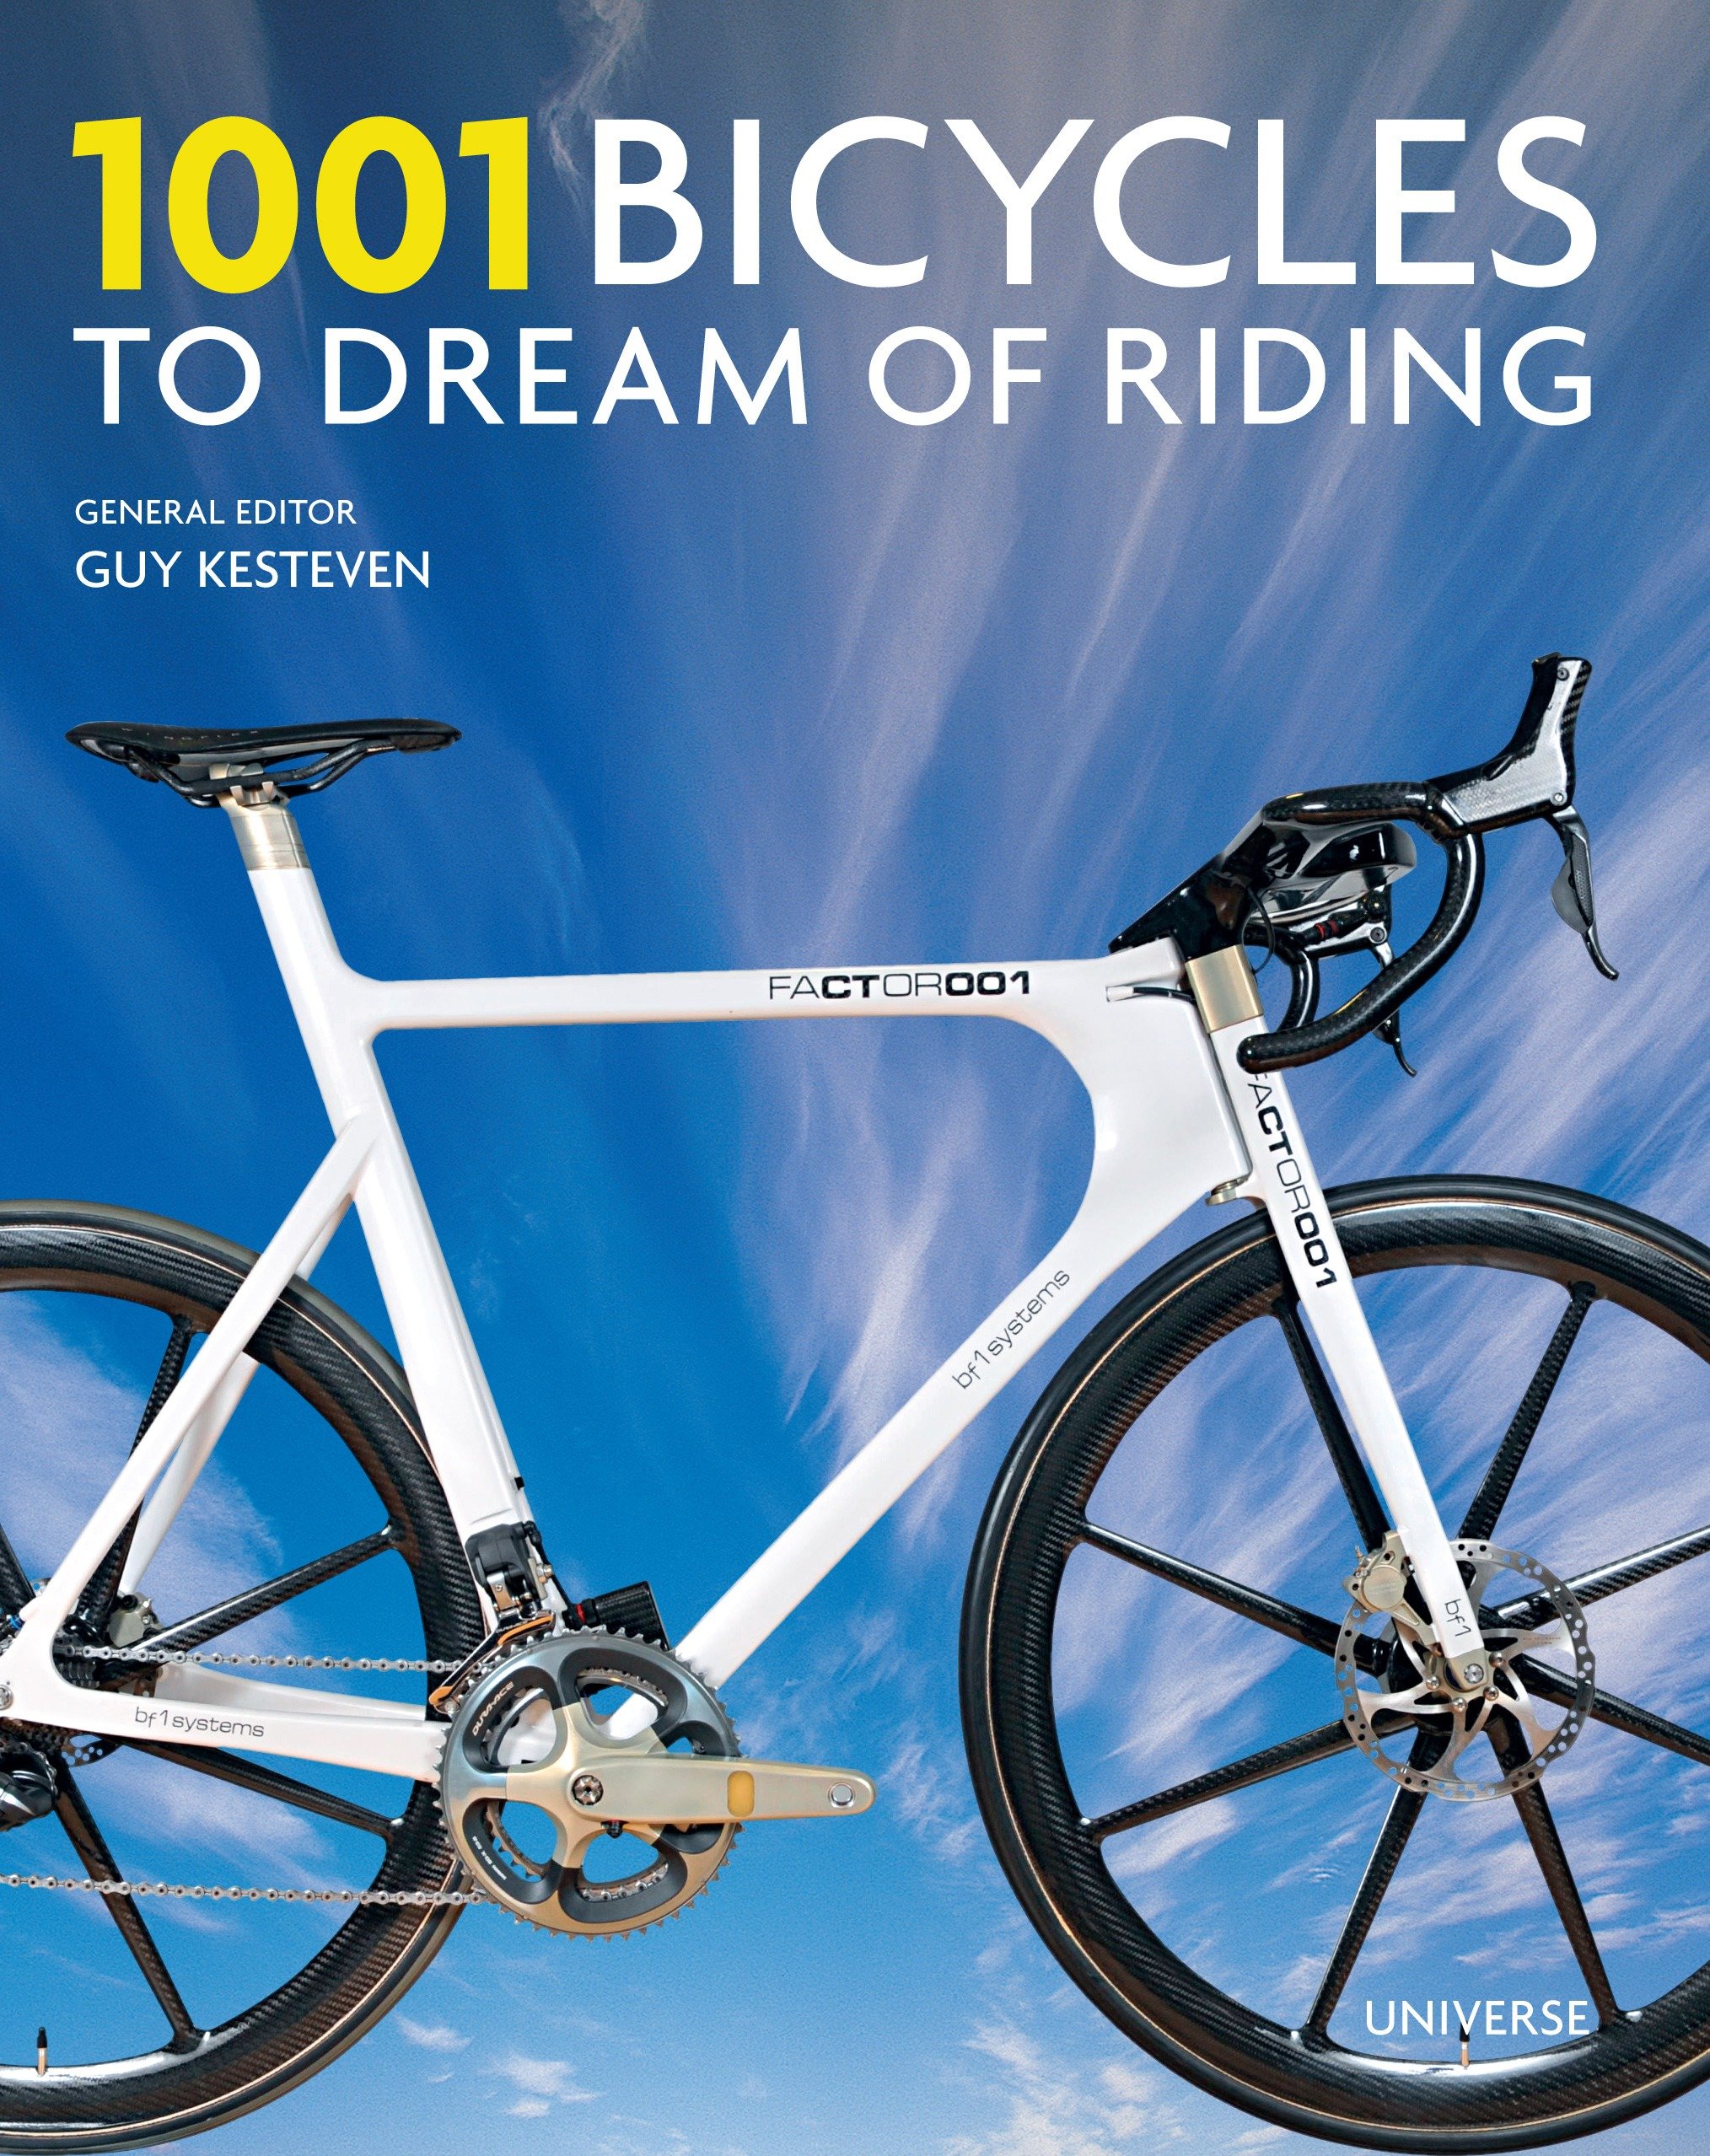 1001 Bicycles To Dream Of Riding (Hardcover Book)